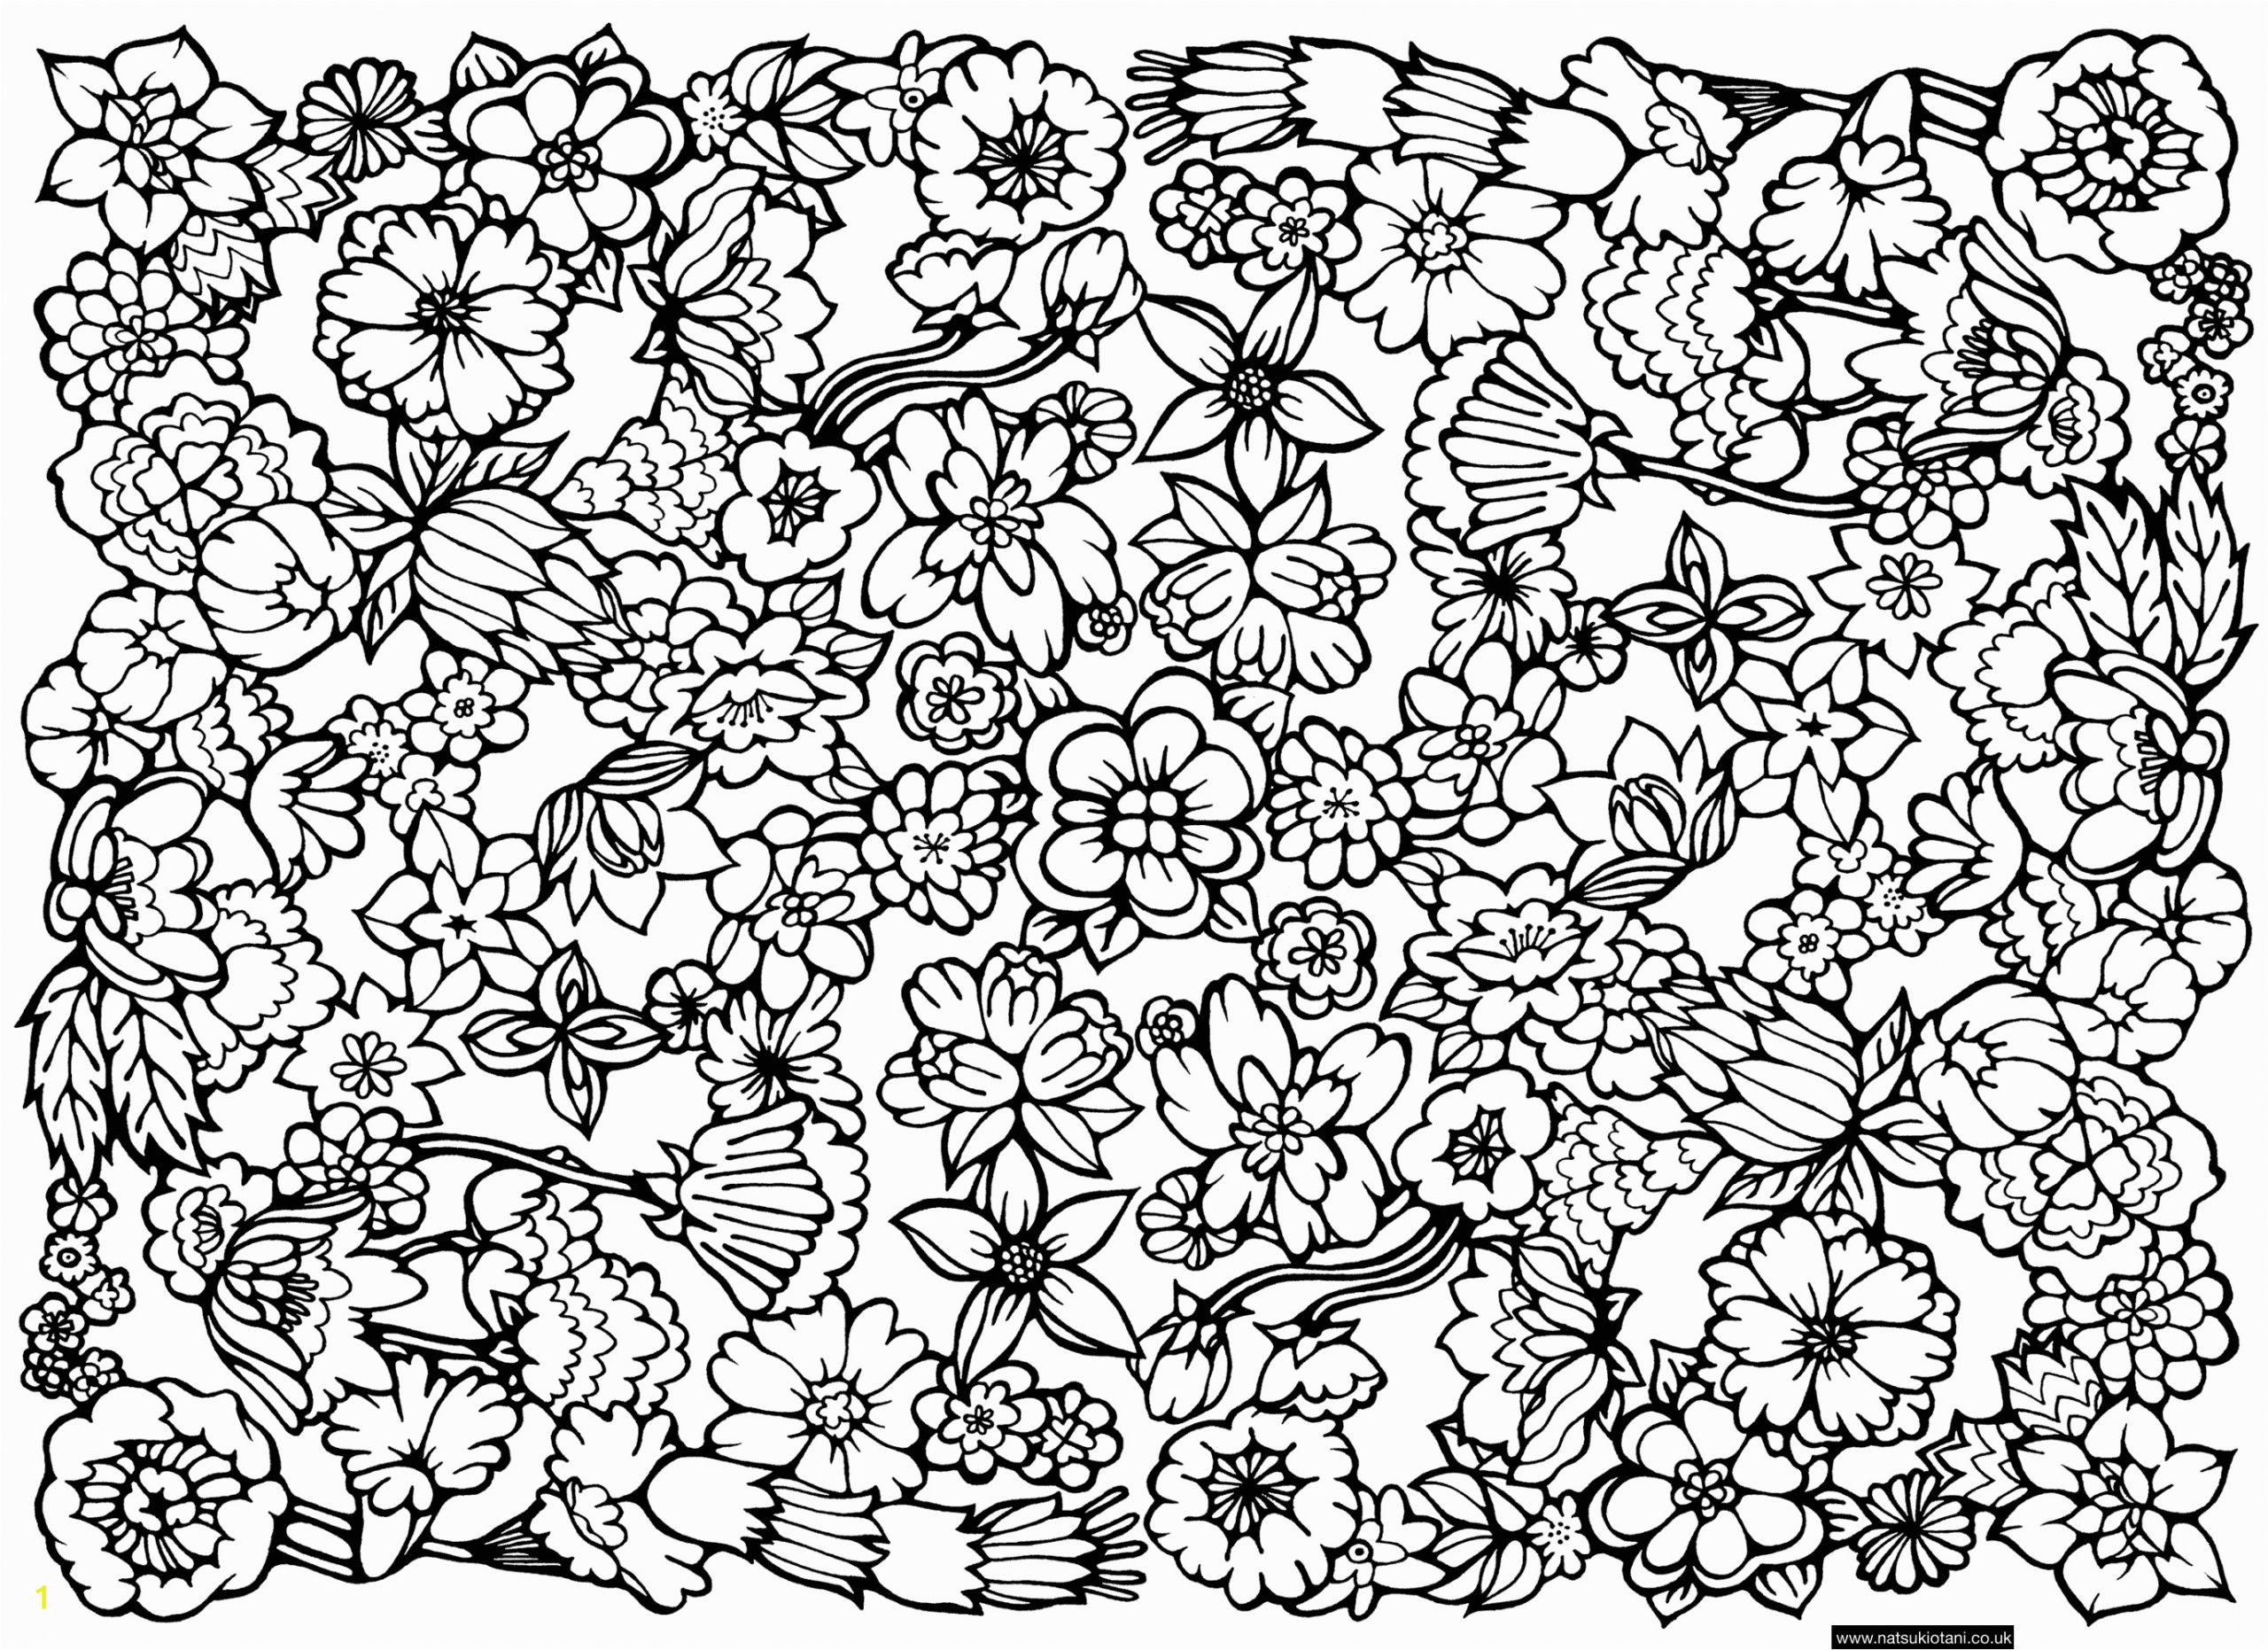 Coloring Pages Of Flowers for Teenagers Difficult Coloring Pages for Girls Hard at Getcolorings